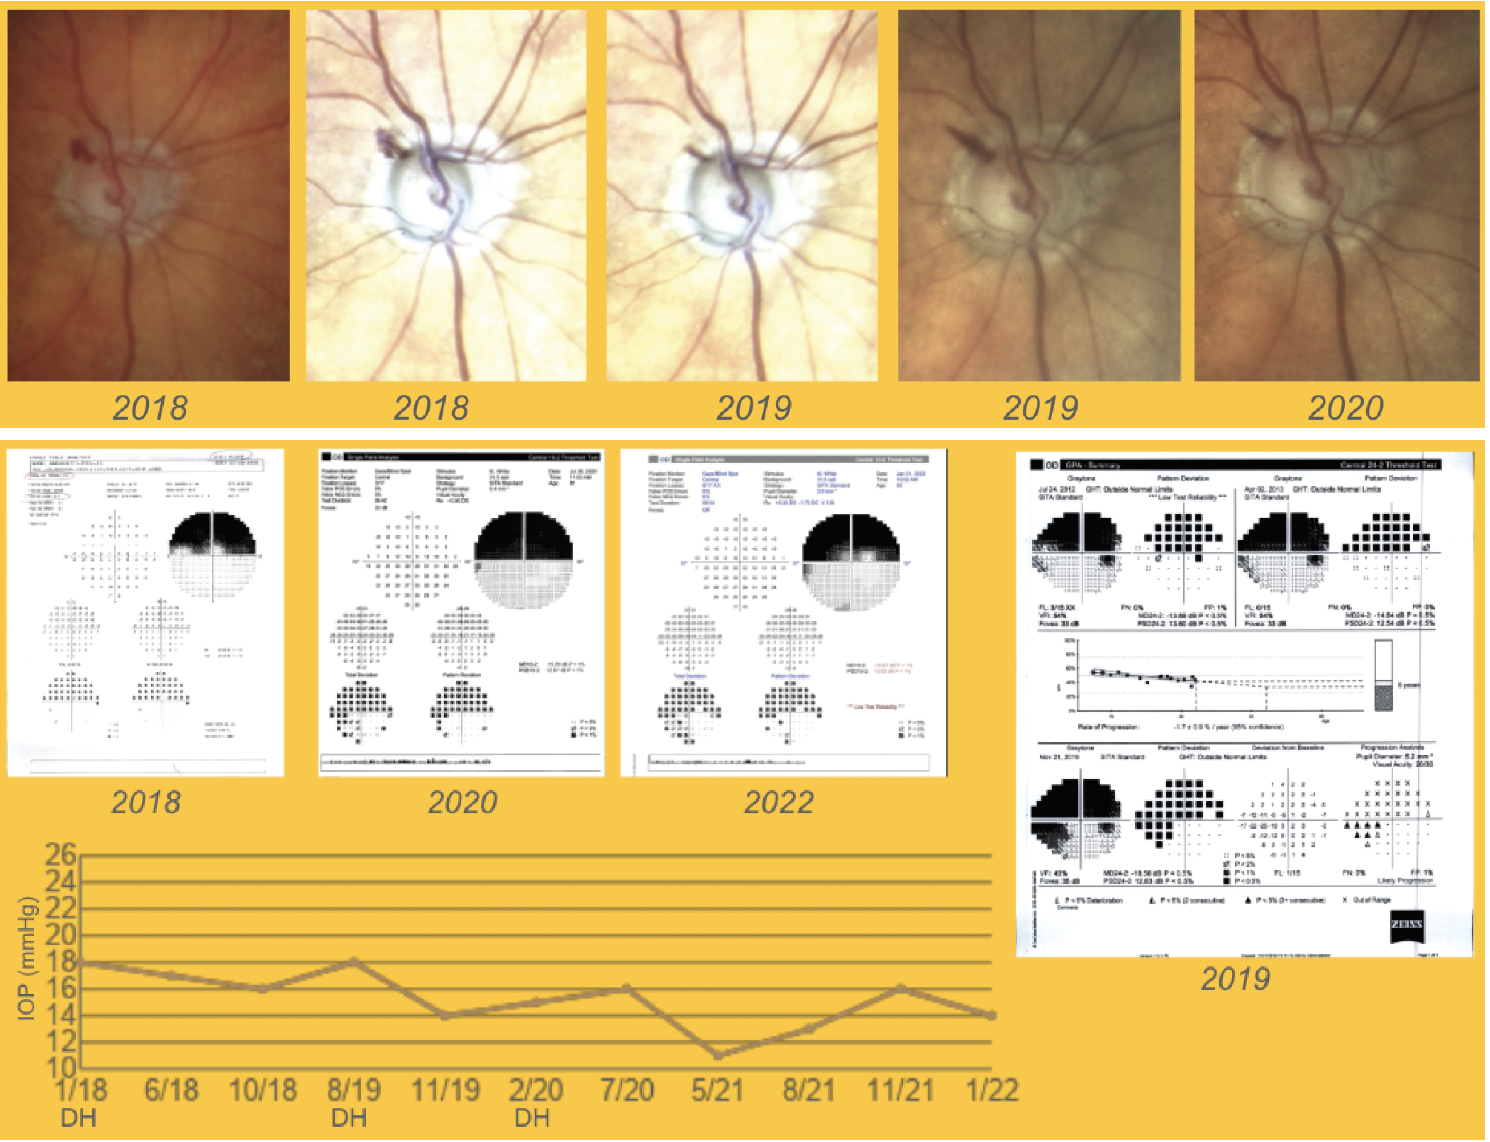 Figure 3. A patient in her 80s developed several disc hemorrhages over a two-year period in the superotemporal area (Case #2). Surgery was recommended, but the patient preferred to use maximal medical therapy, which was adjusted to further decrease IOP, and has remained stable. Some inferonasal spots were seen on the 2020 10-2 visual fields but IOP remained overall stable.